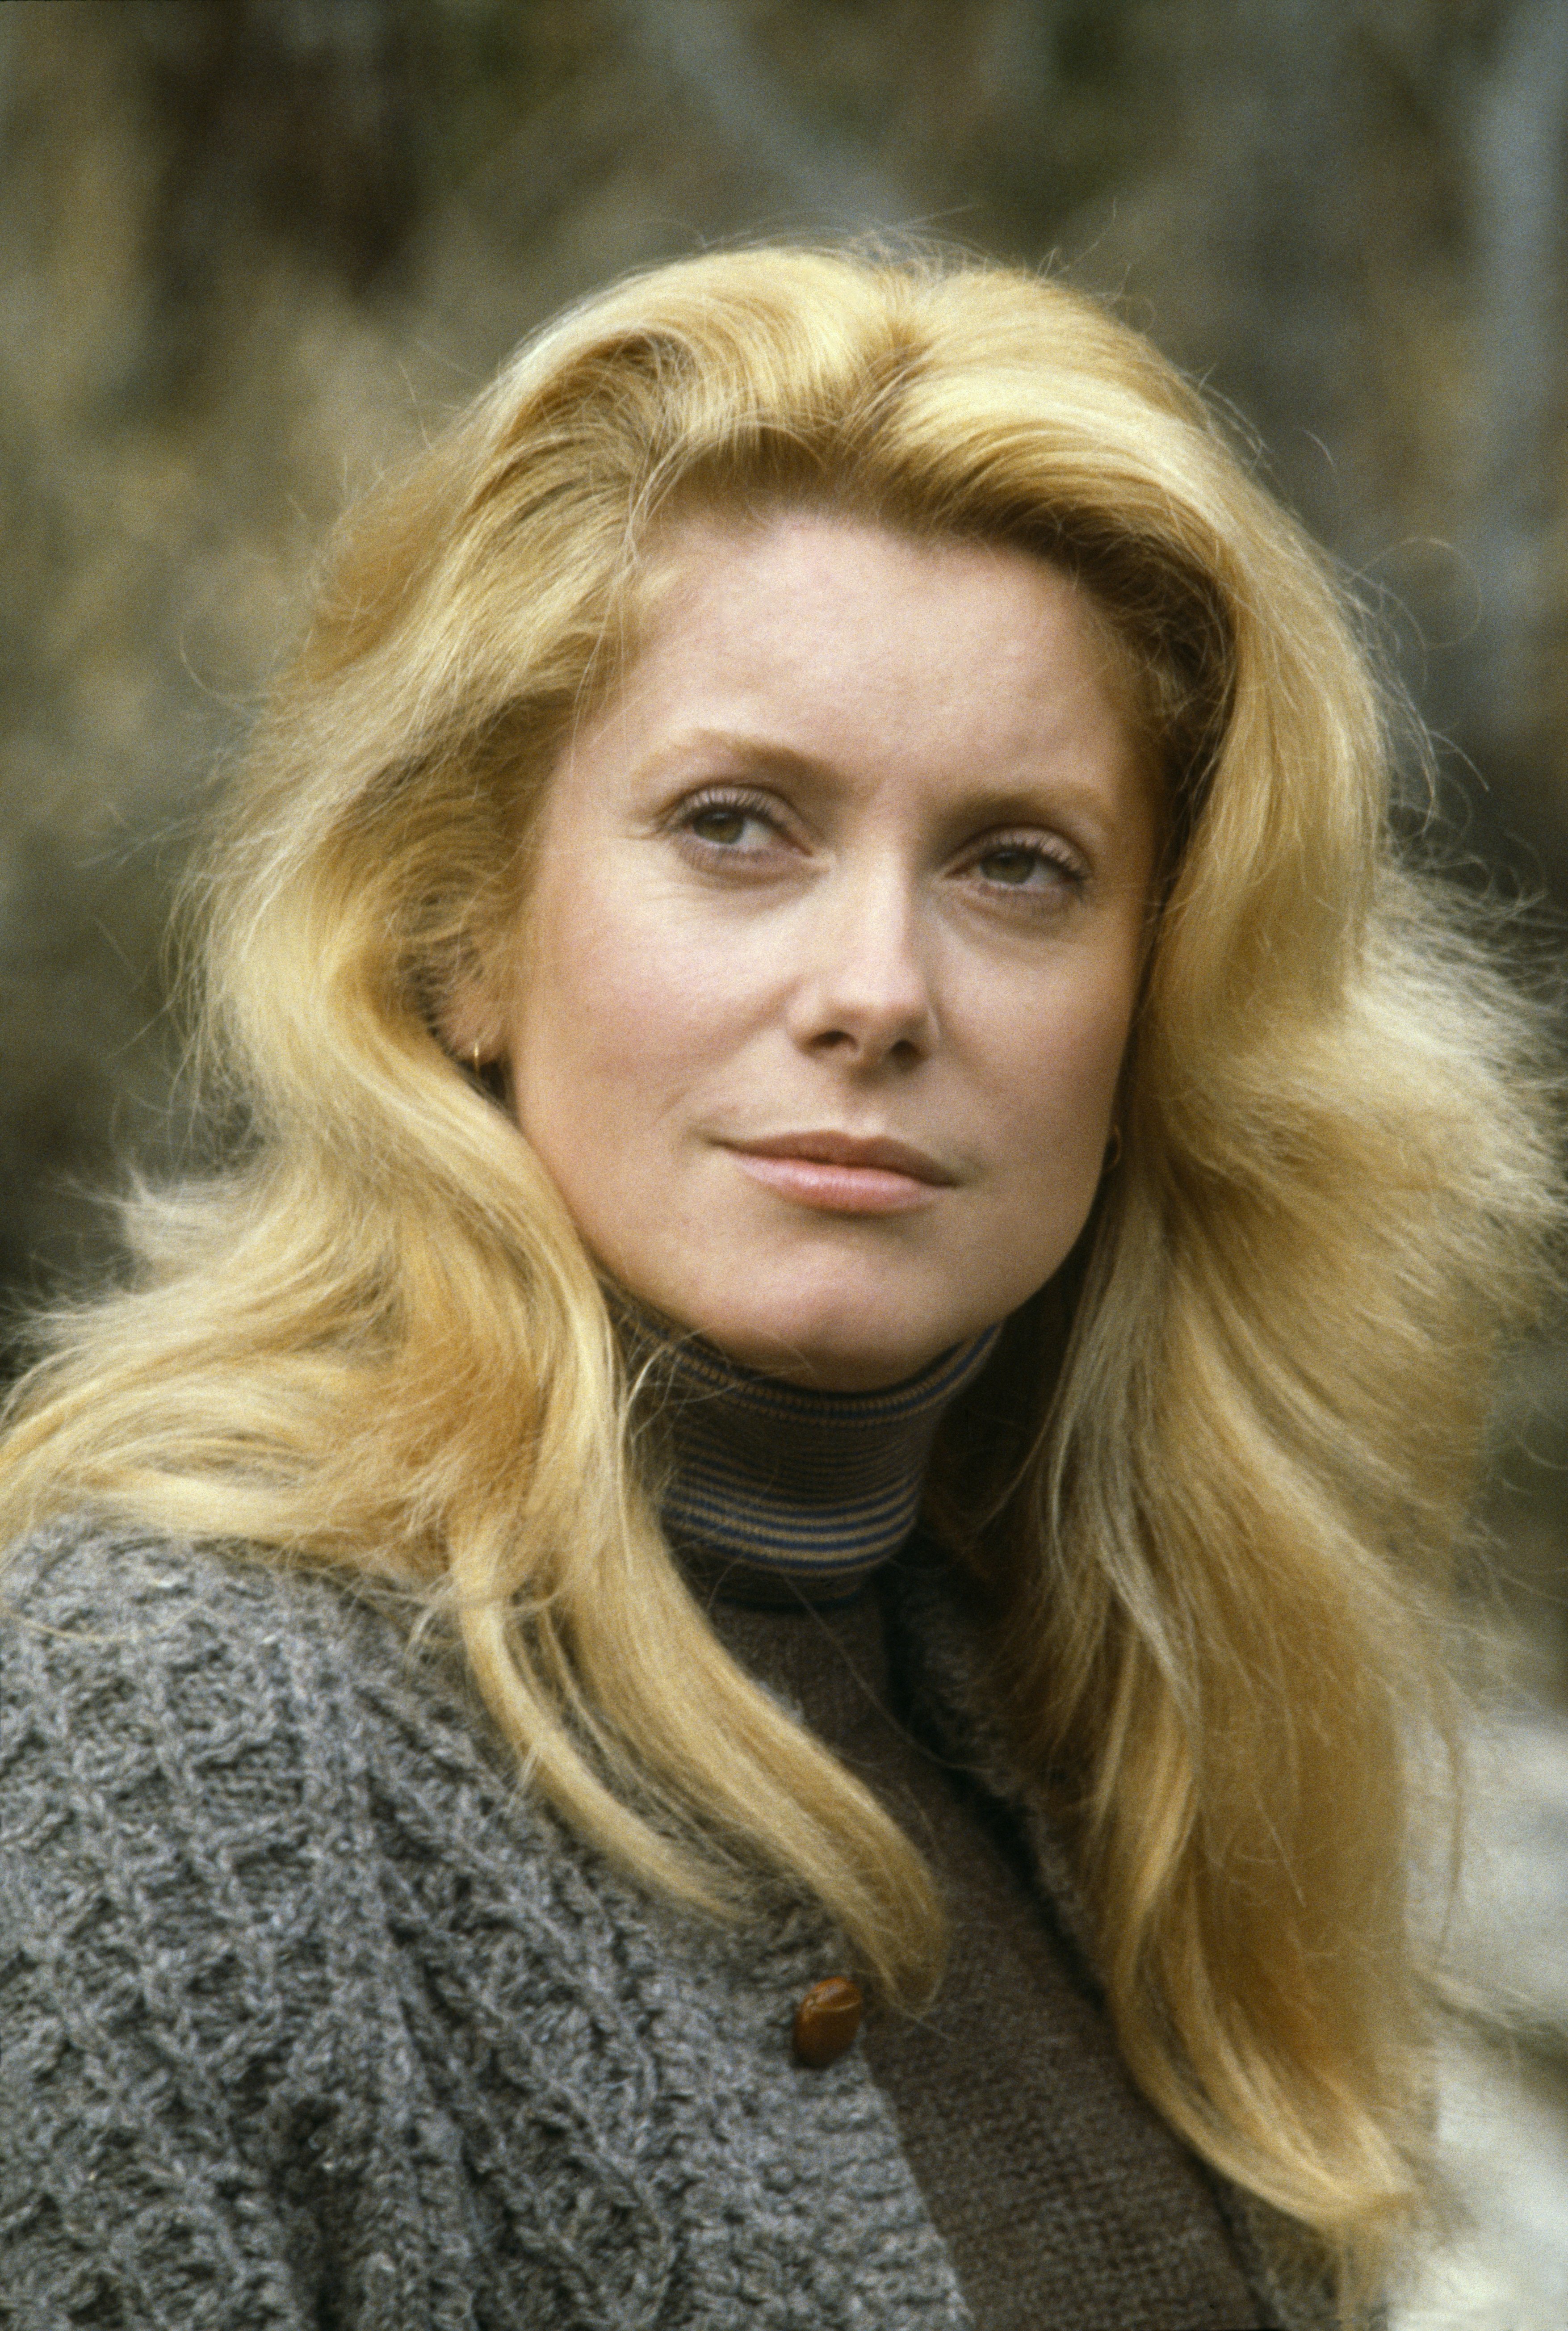 Cathrine Deneuve on the set of the film "A Nous Deux" in 1979. | Source: Getty Images 